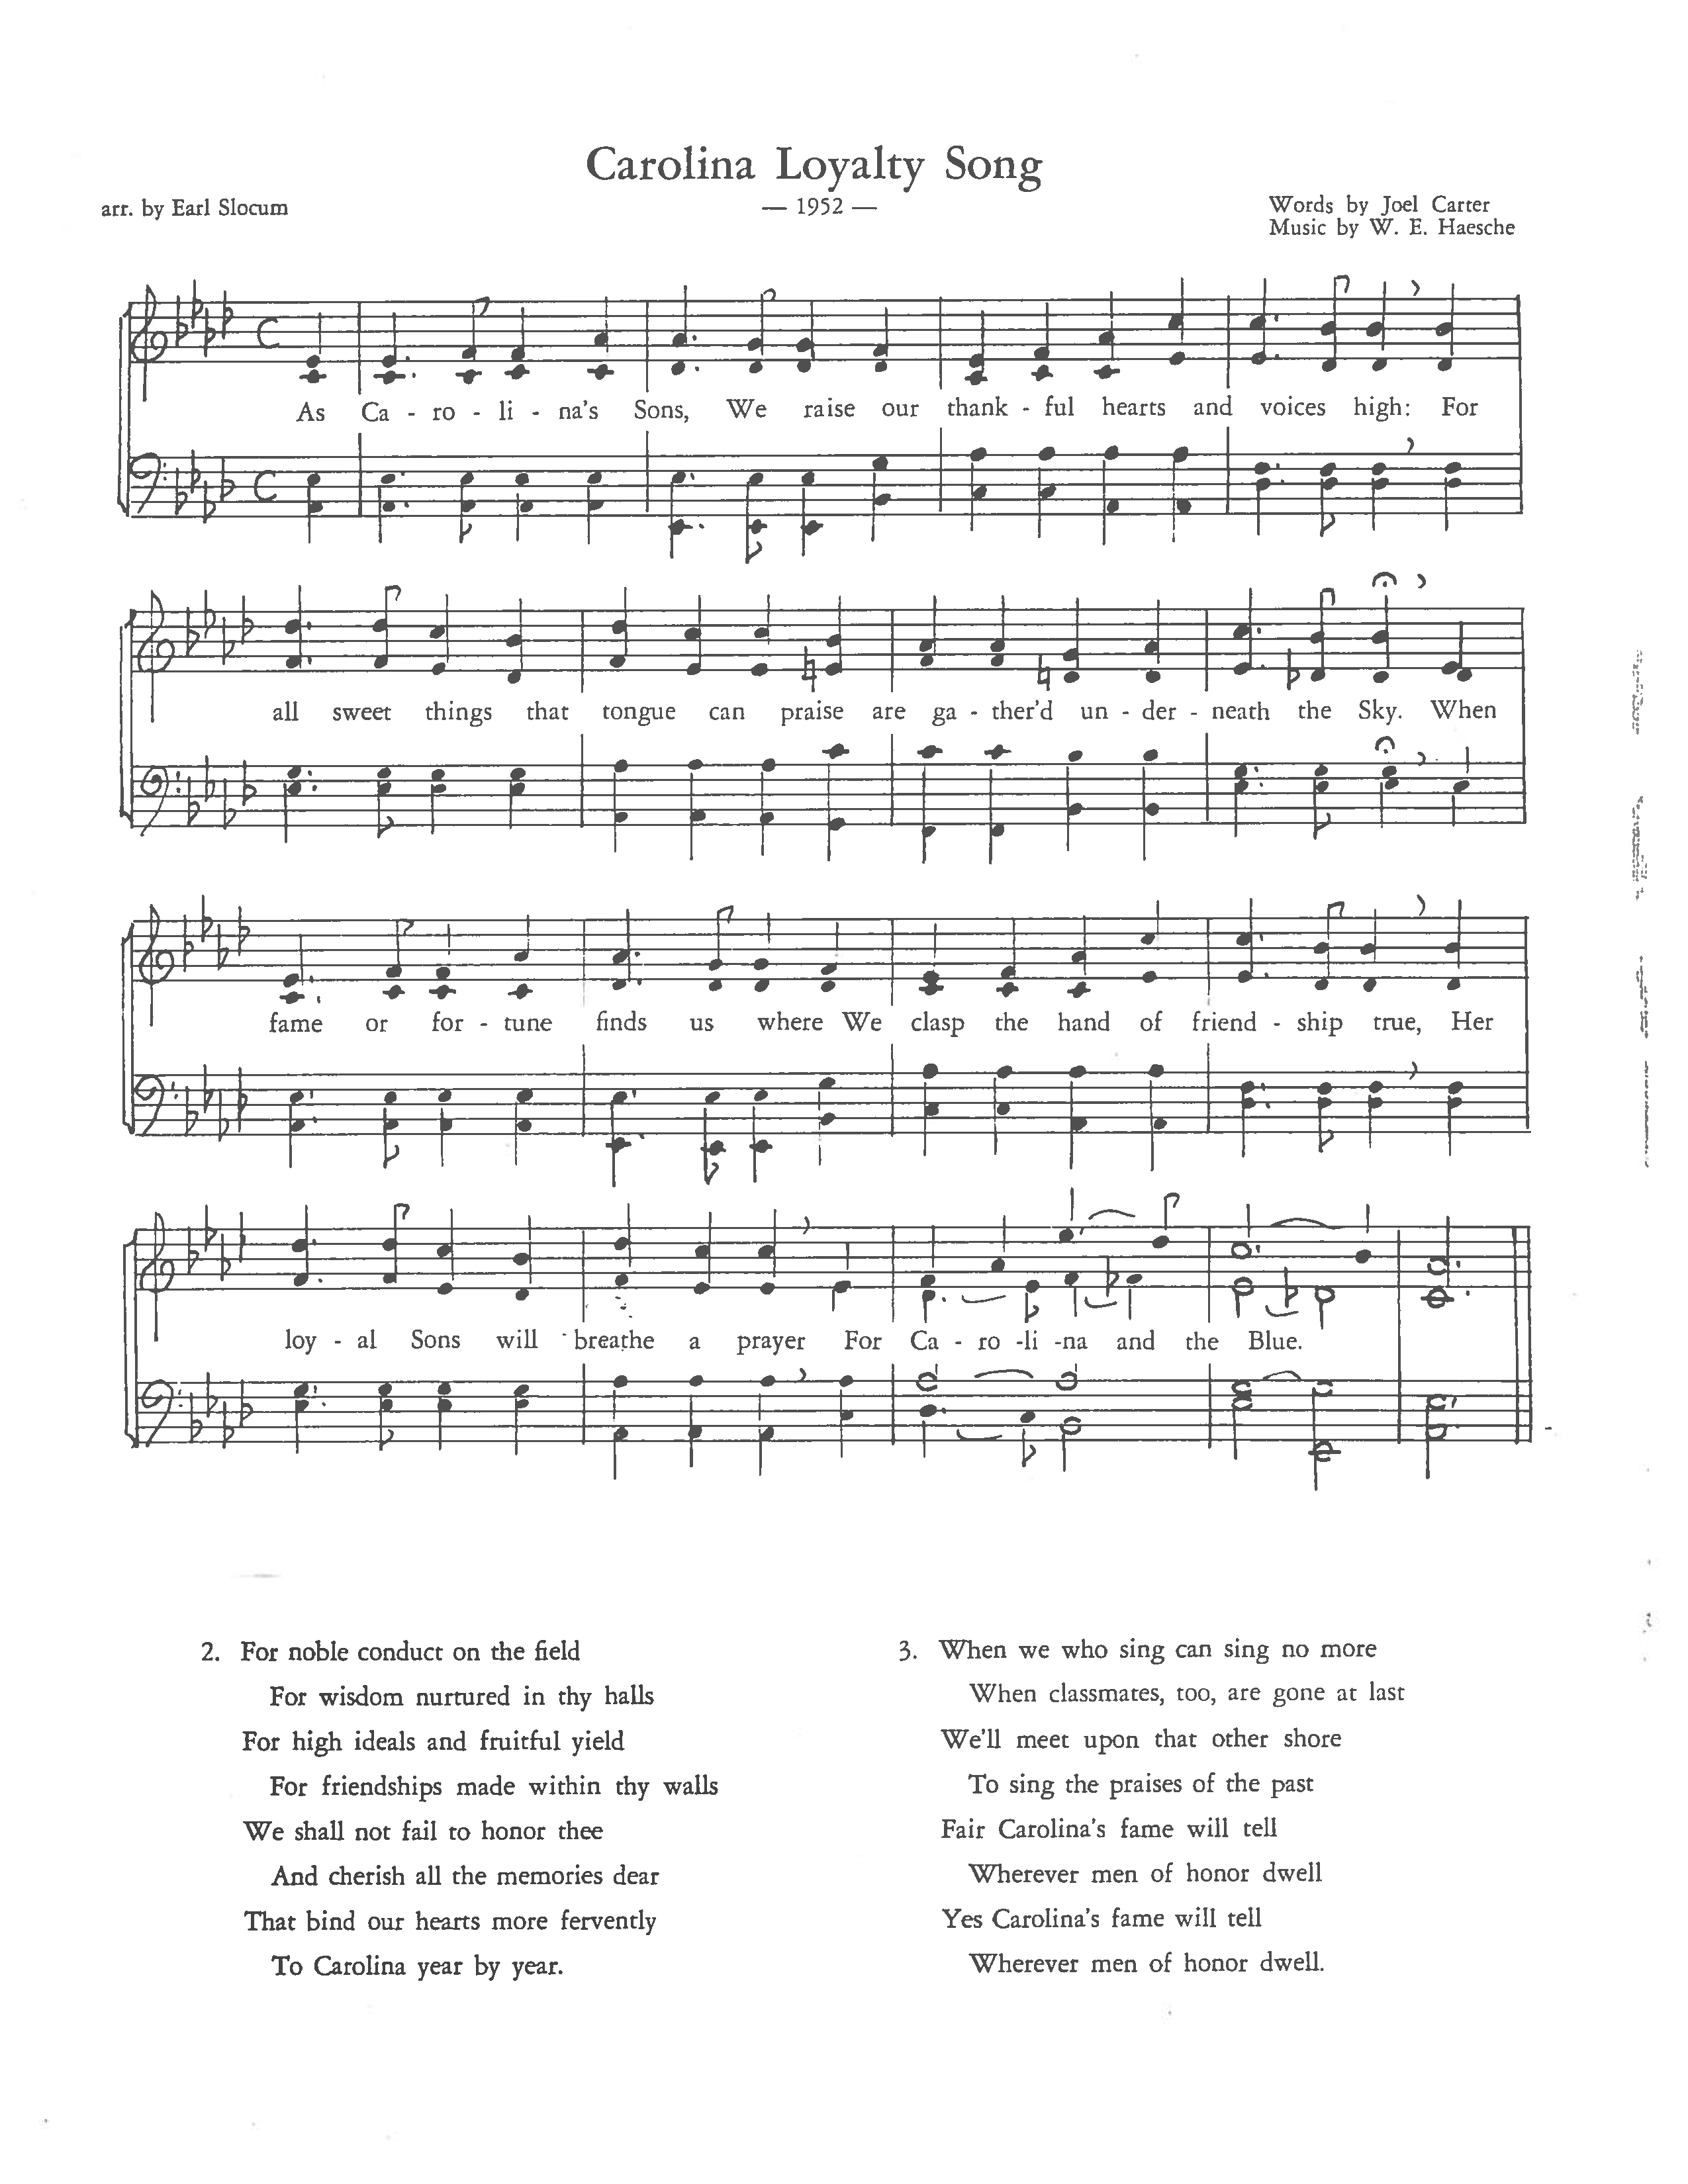 Sheet Music for Carolina Loyalty Song, by Joel Carter and W.E. Haesche. Arranged by Earl Slocum.